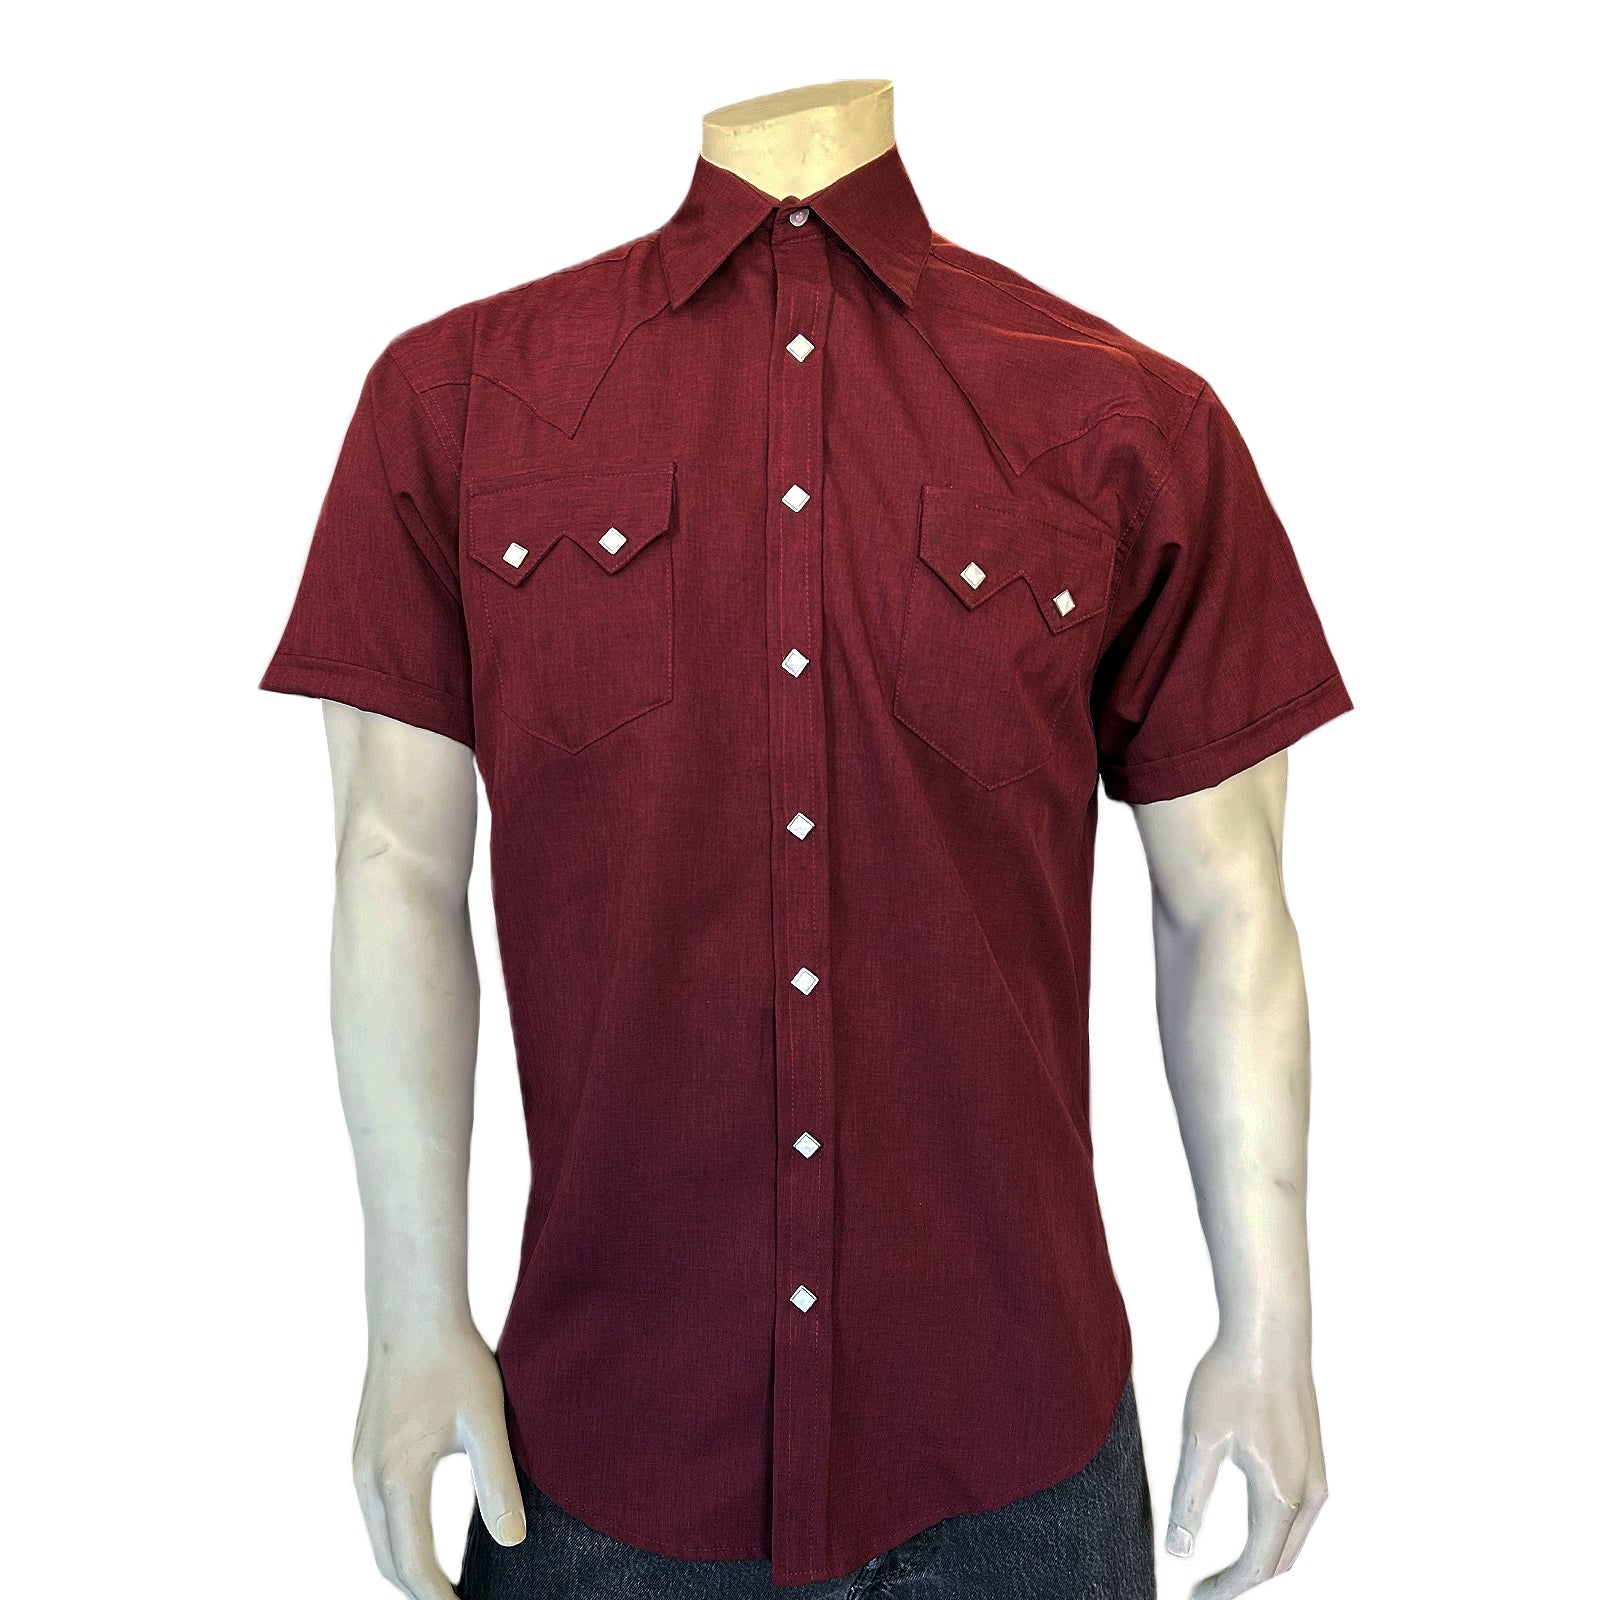 Rockmount Men's Short Sleeve Solid Burgundy Shirt with UV Protection